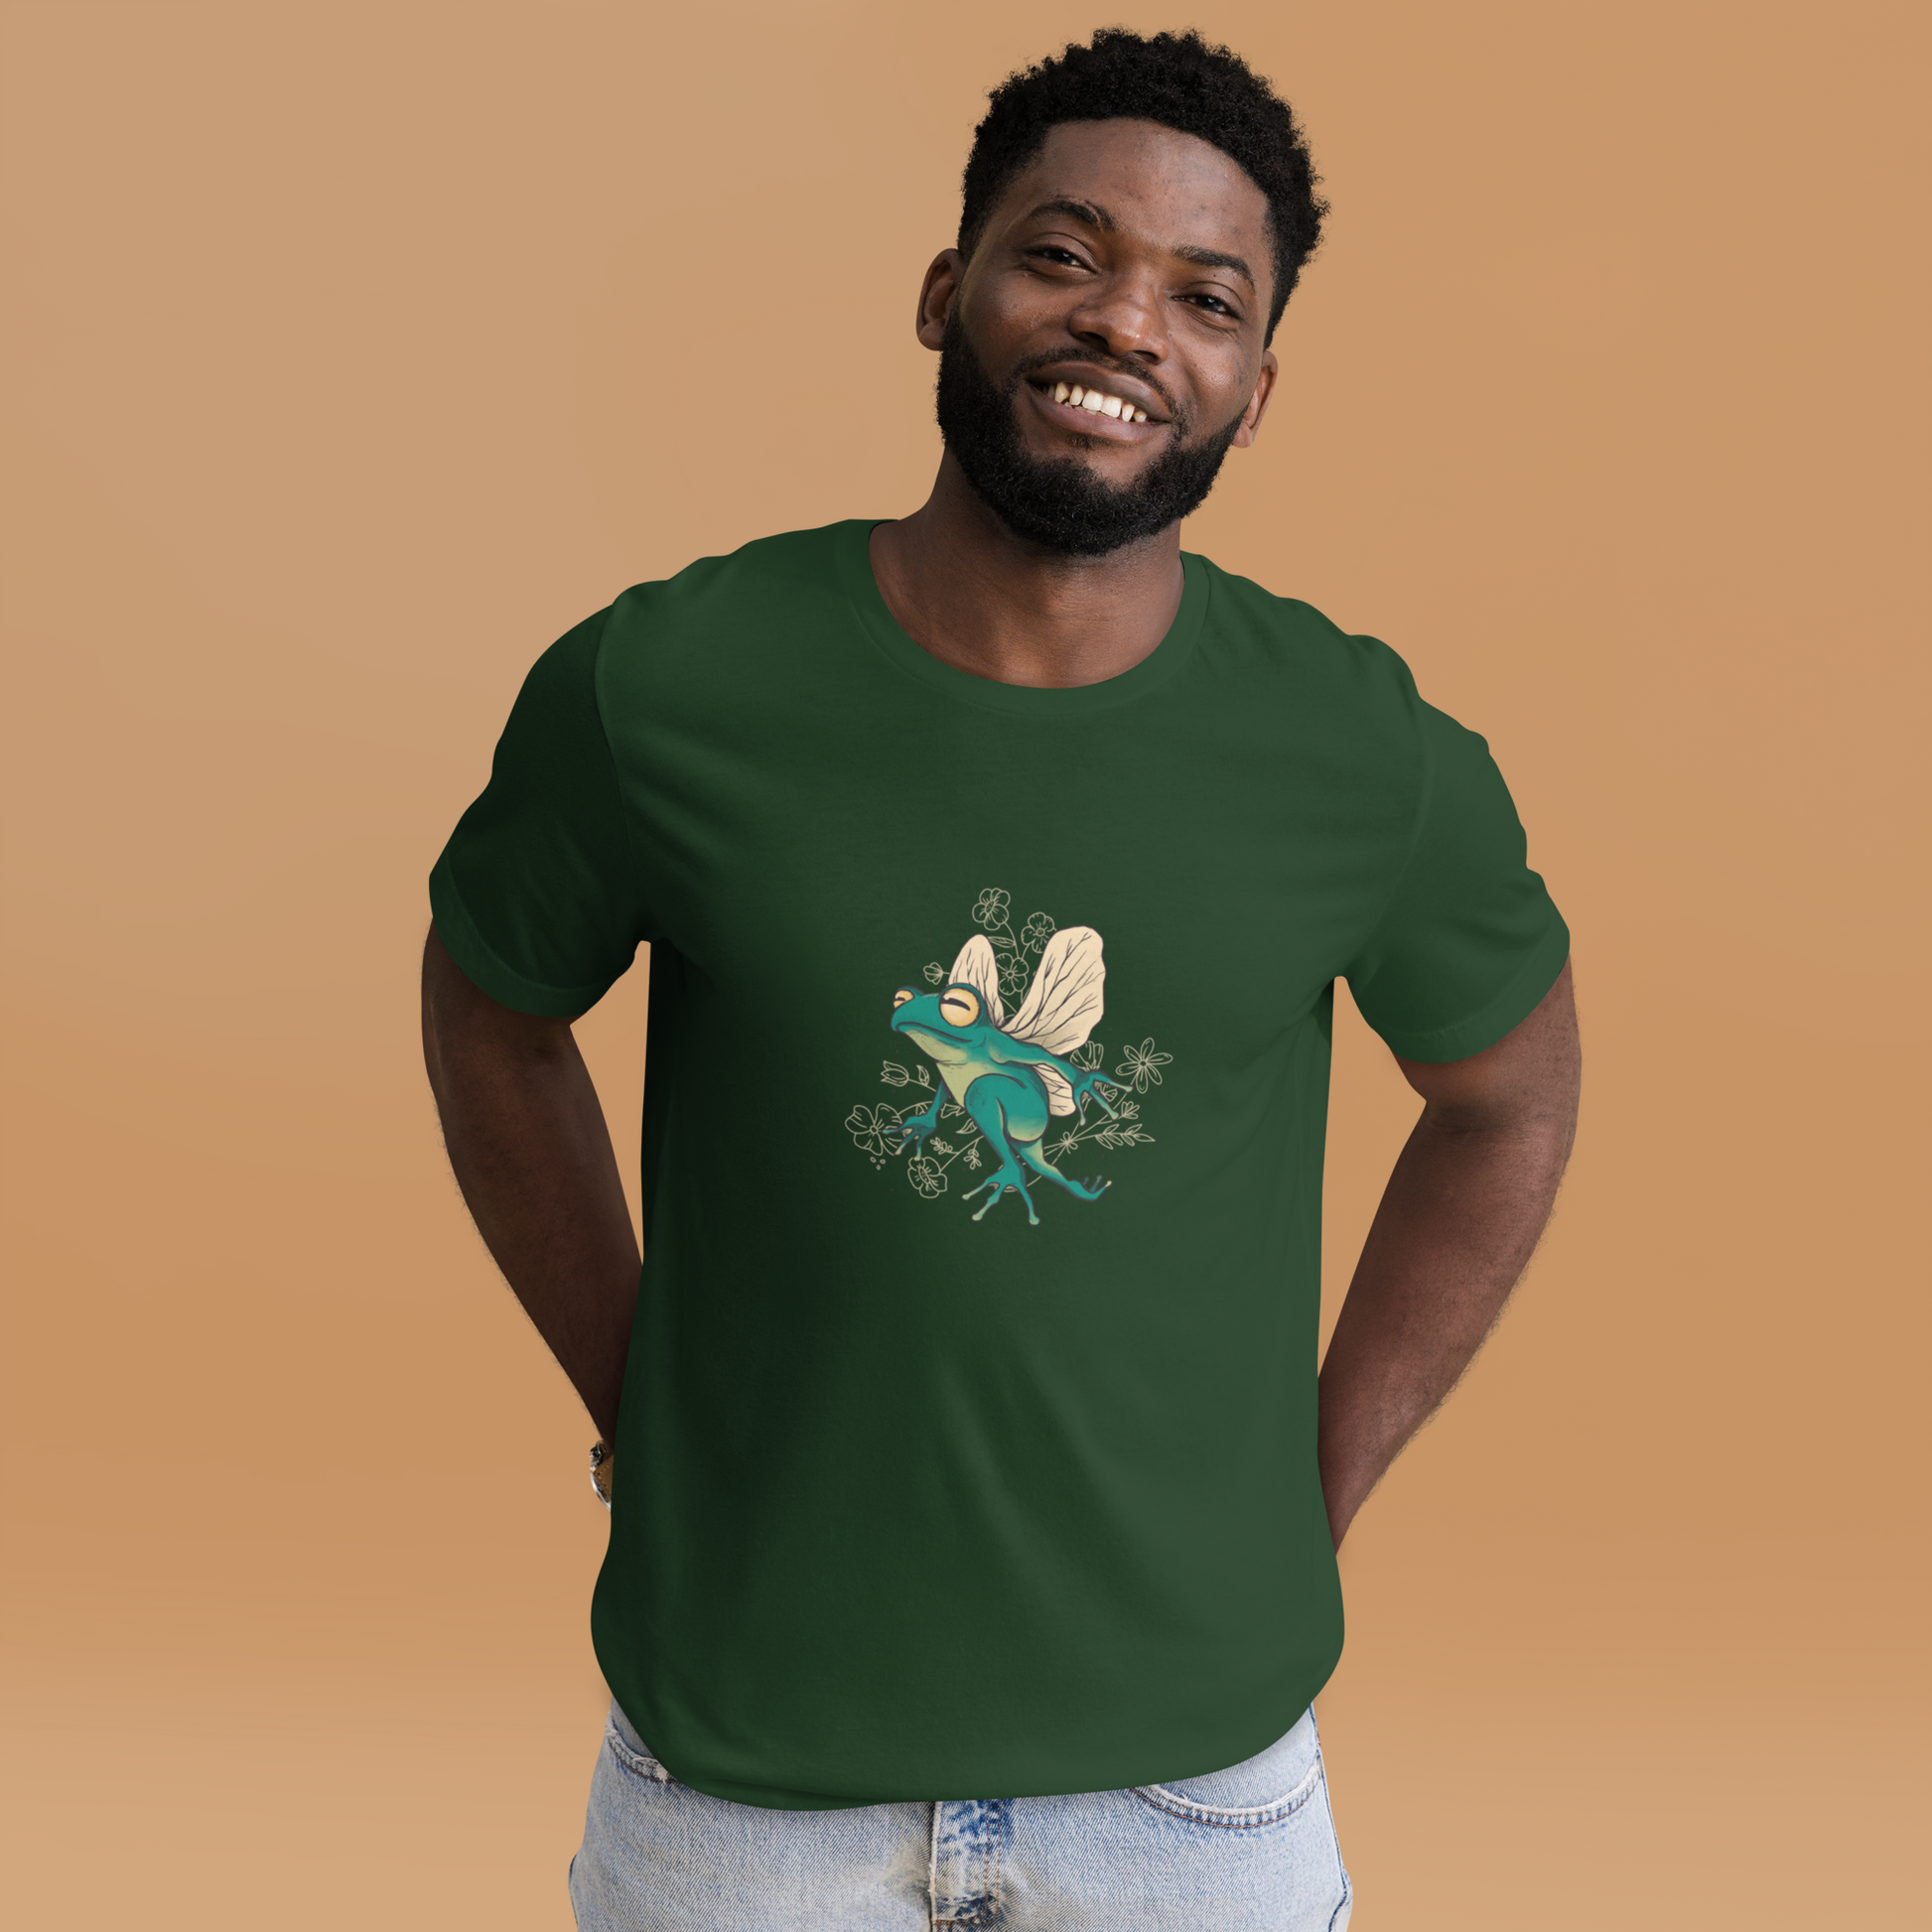 Smiling man wearing a Forest Green Premium Frog T-Shirt featuring an adorable Fairy Frog graphic on the chest - Funny Graphic Frog Tees - Boozy Fox